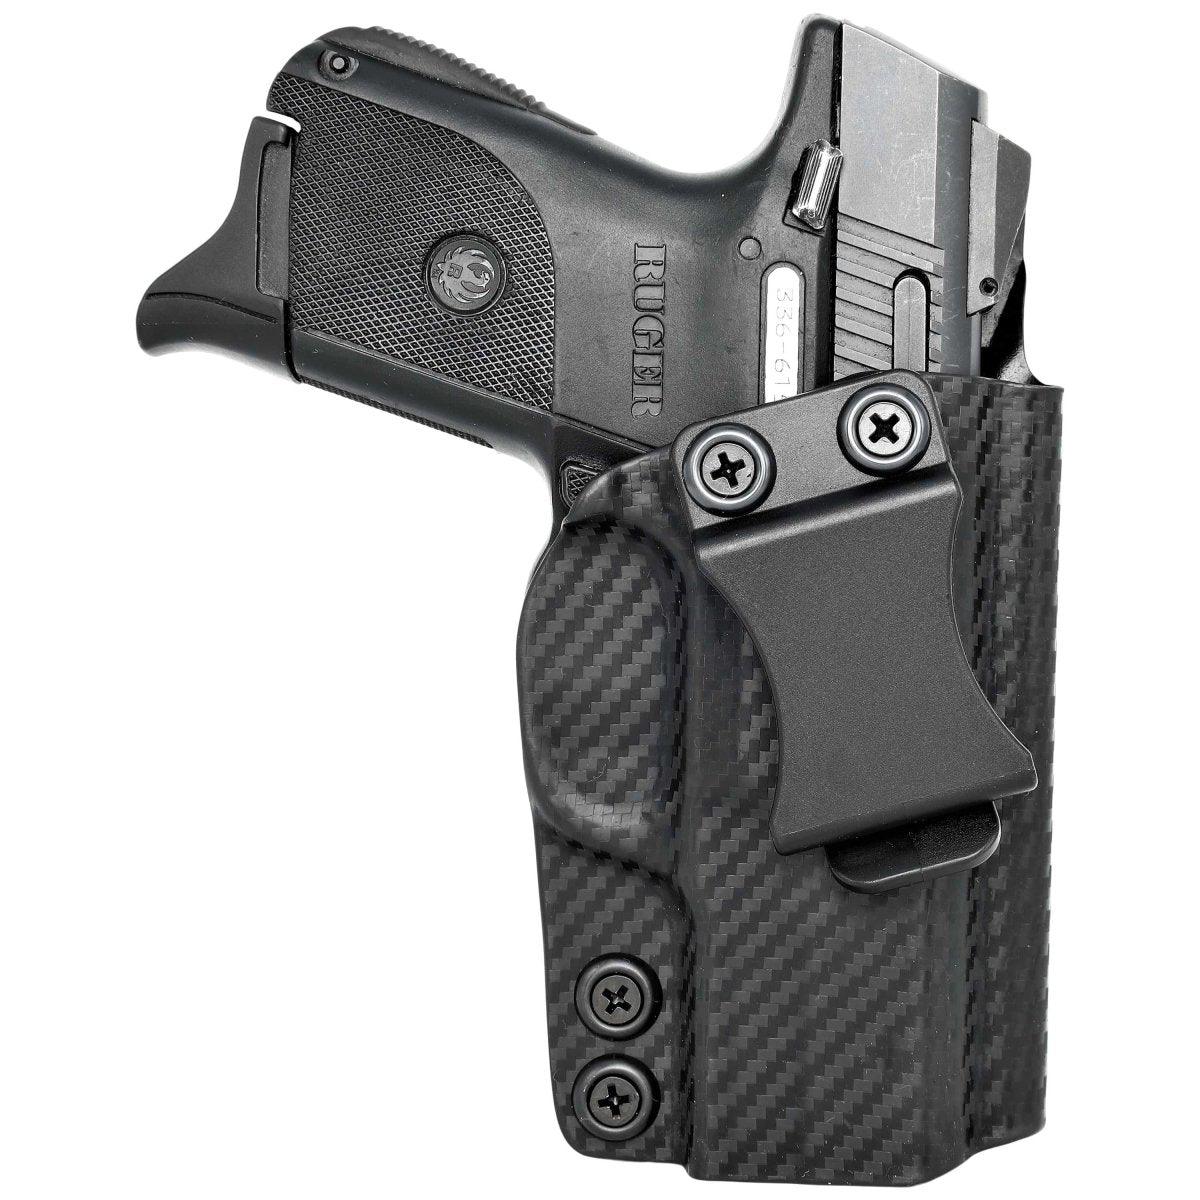 SR9 HOLSTERS